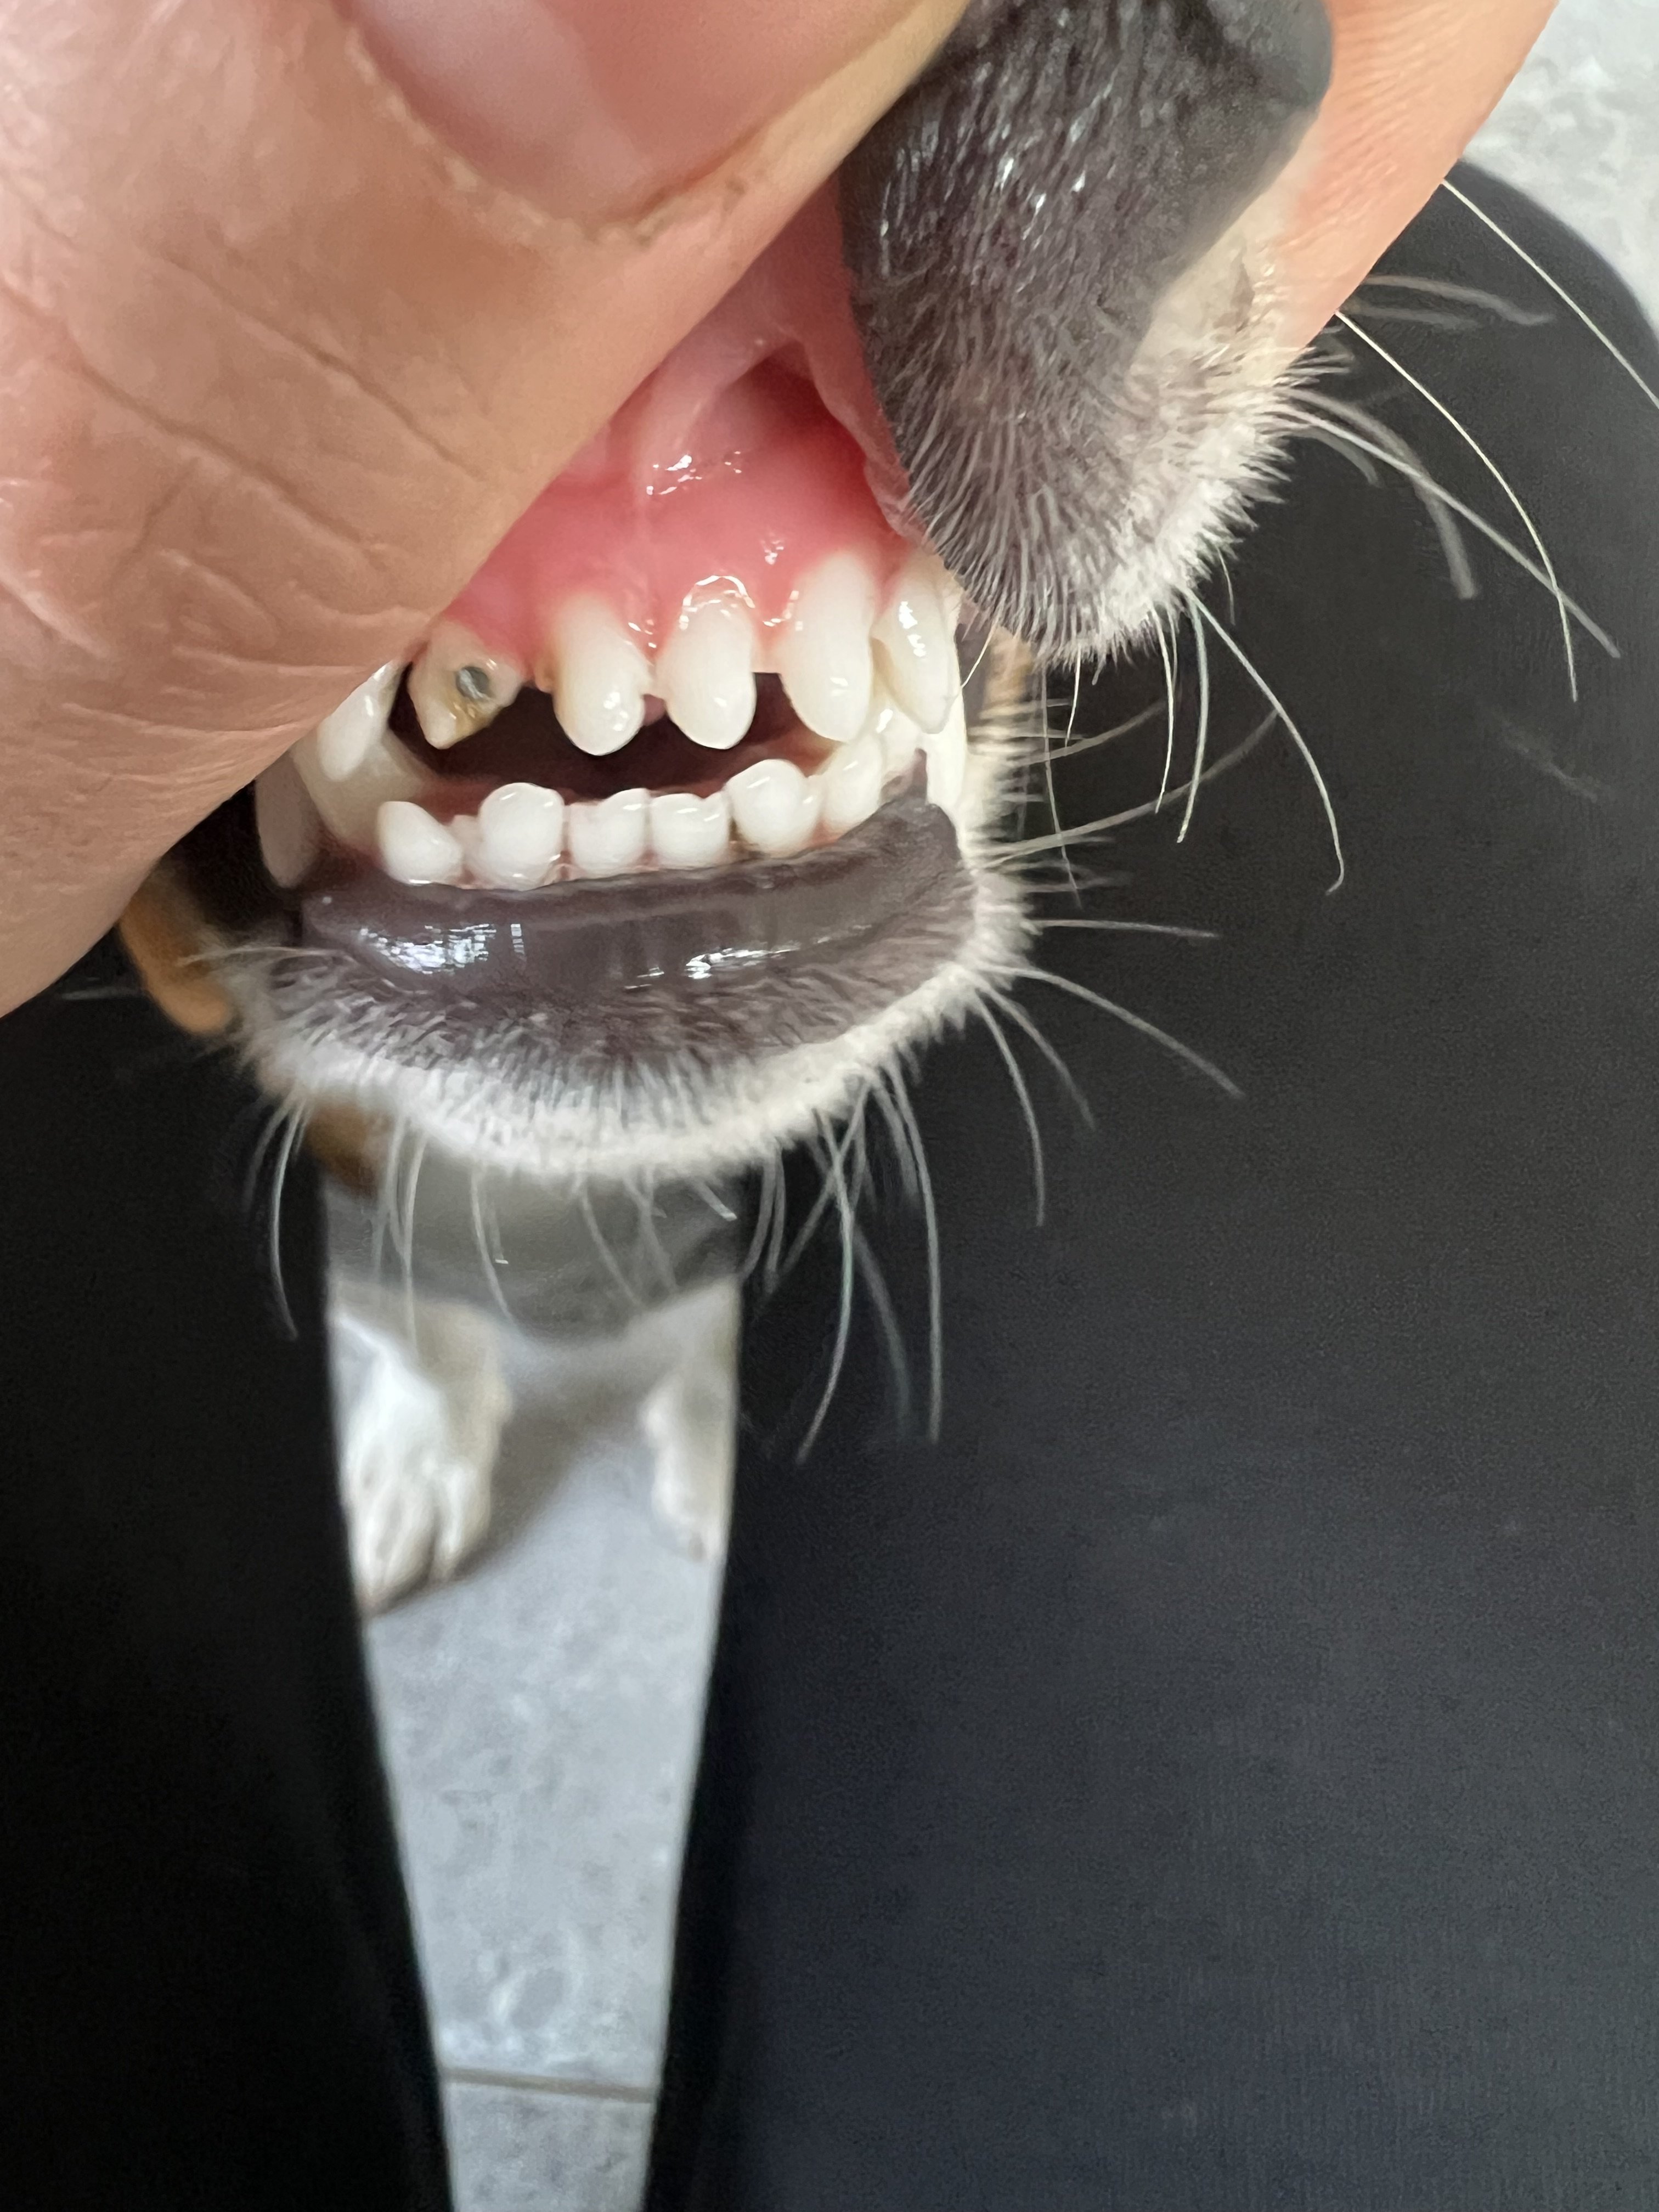 Need help about puppy tooth